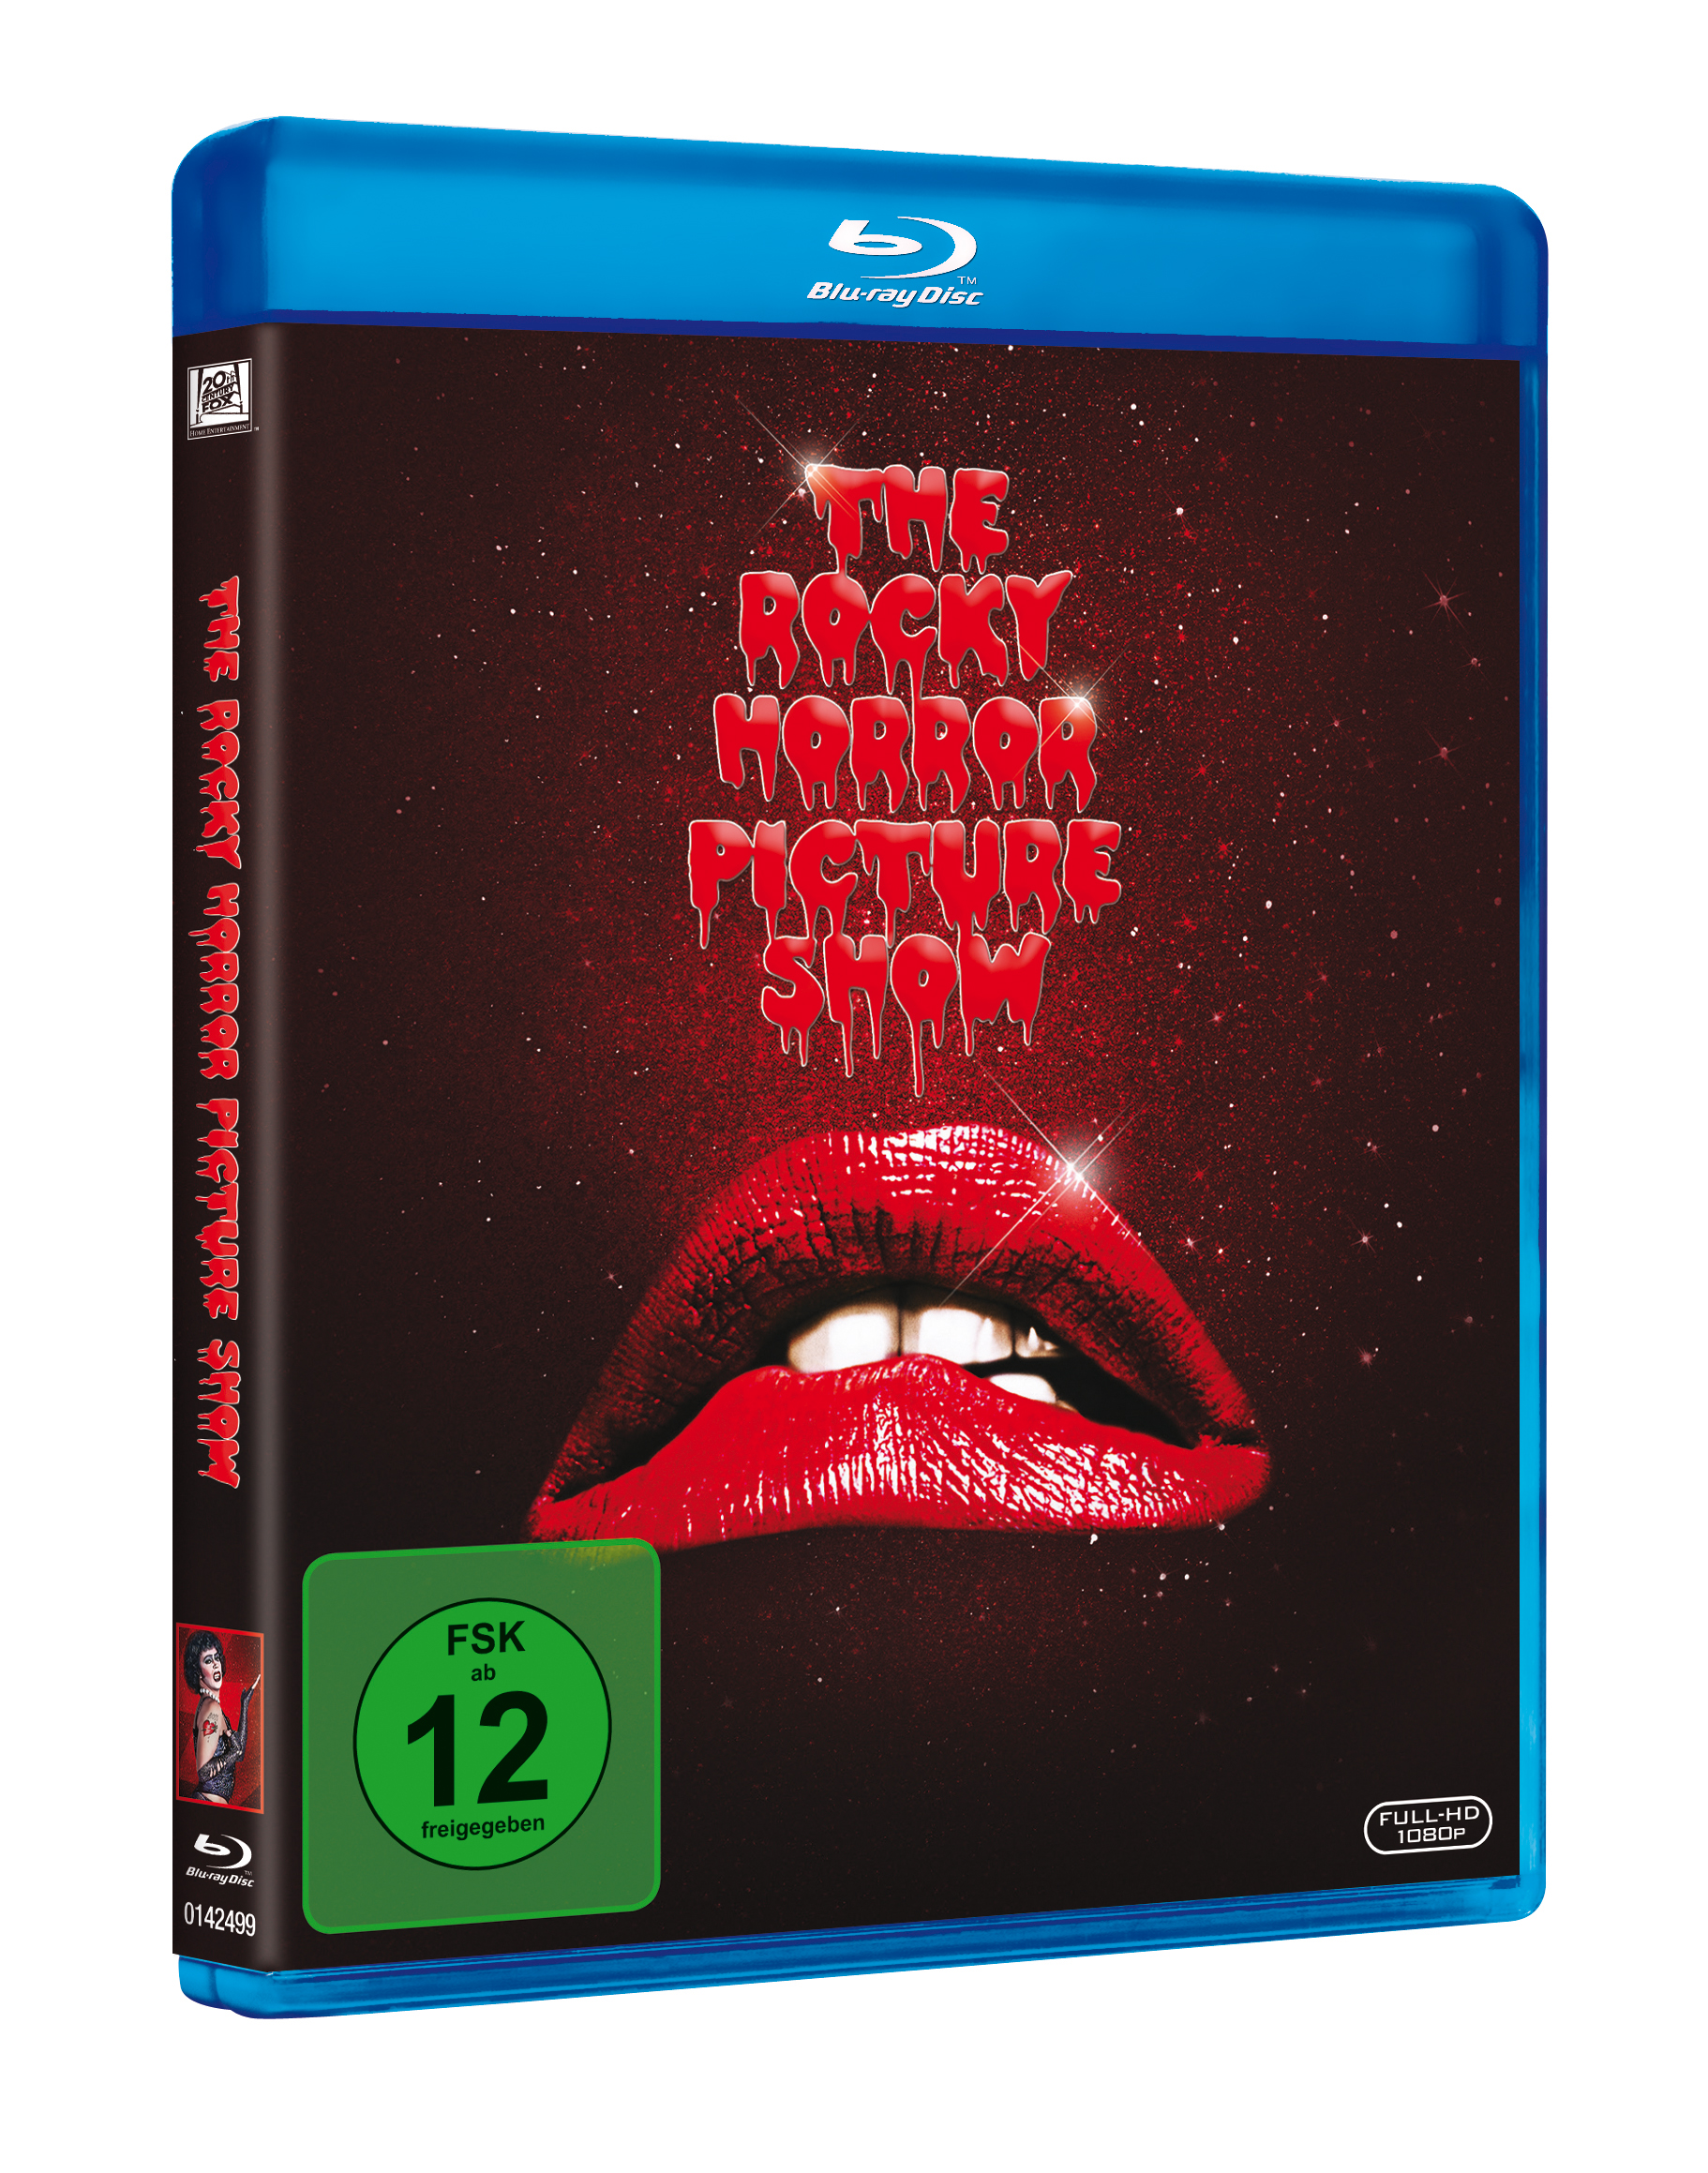 The Blu-ray Show Horror Rocky Picture